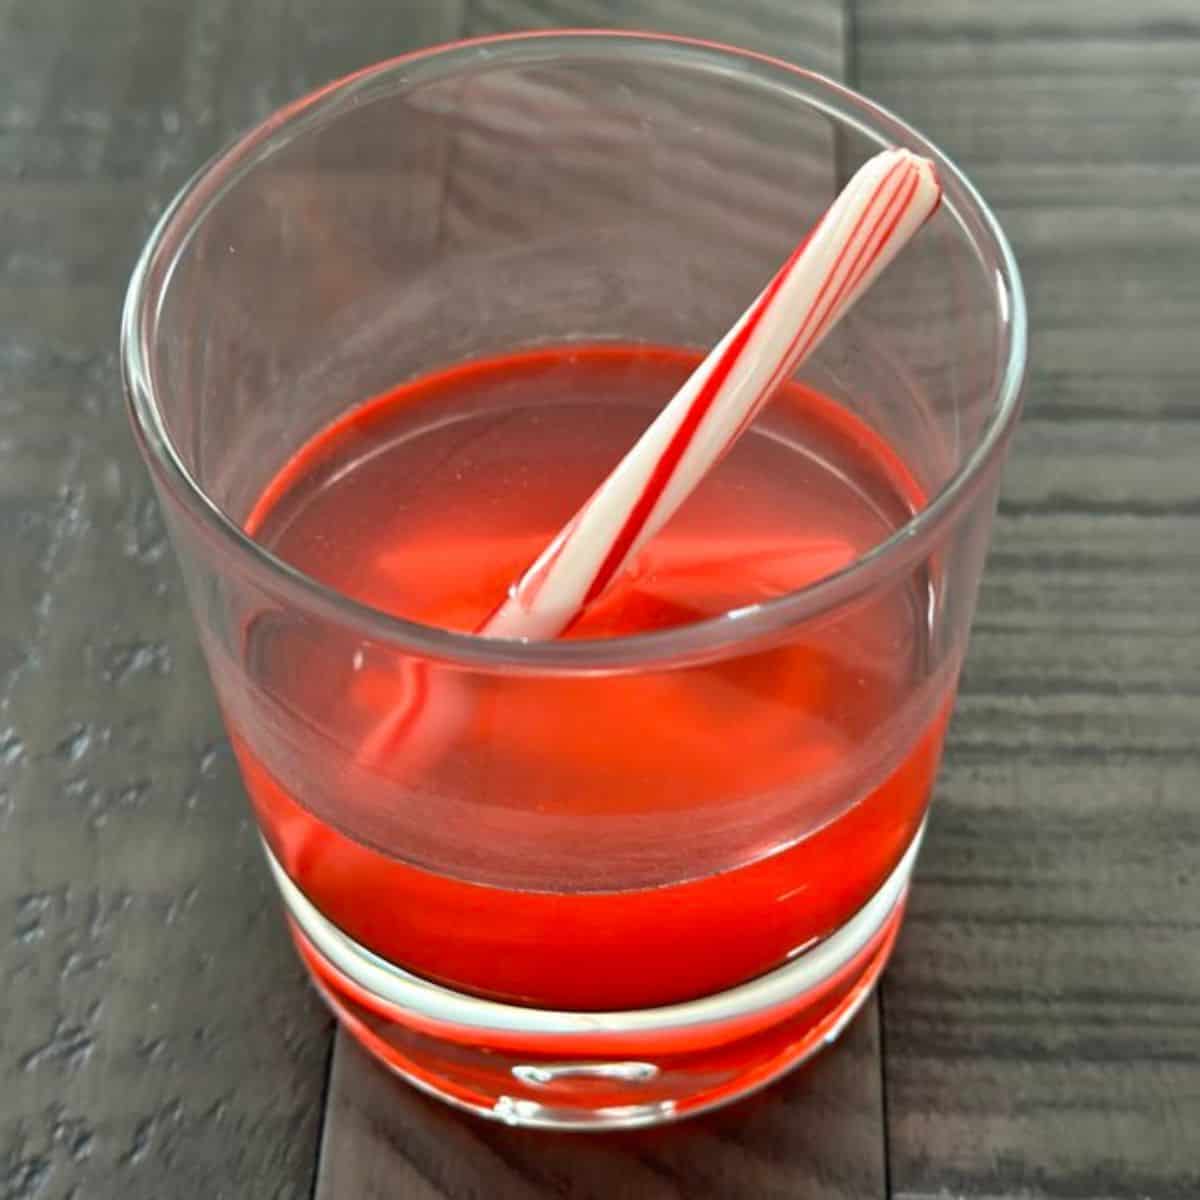 Old fashioned glass with a candy cane slowly melting in vodka.